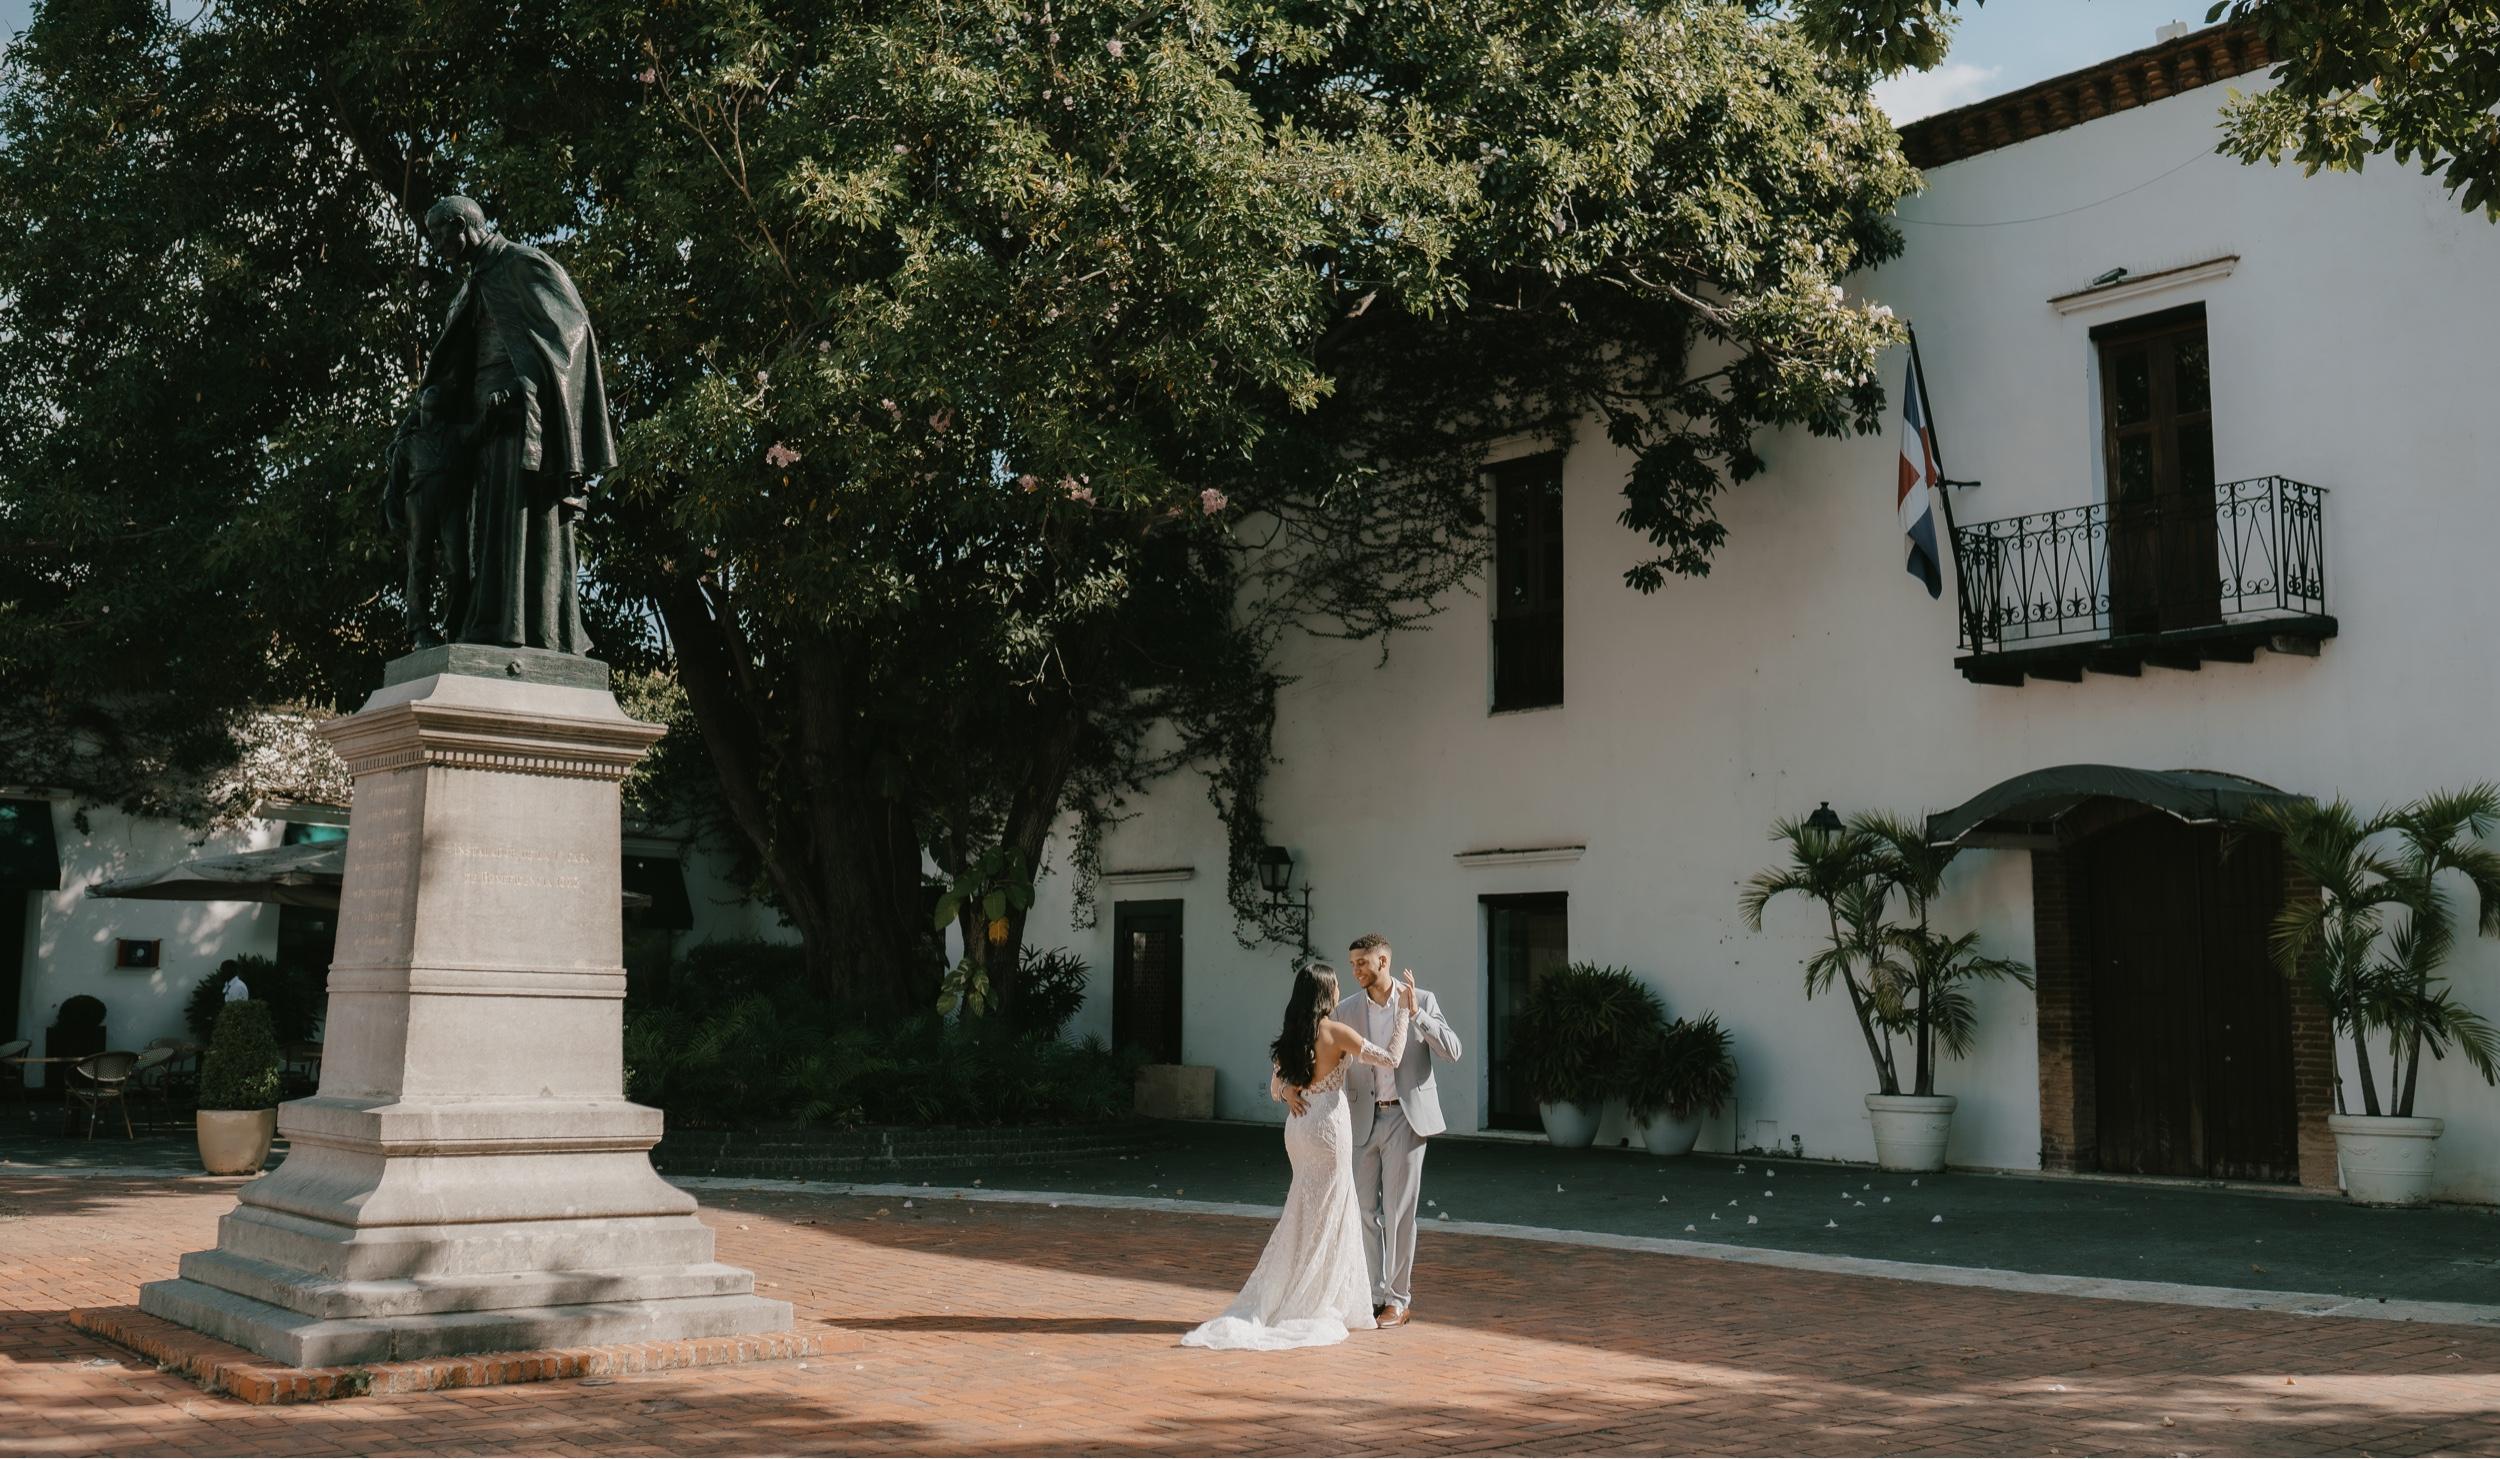 The Wedding Website of Sarai Melo and Jeremy Mateo